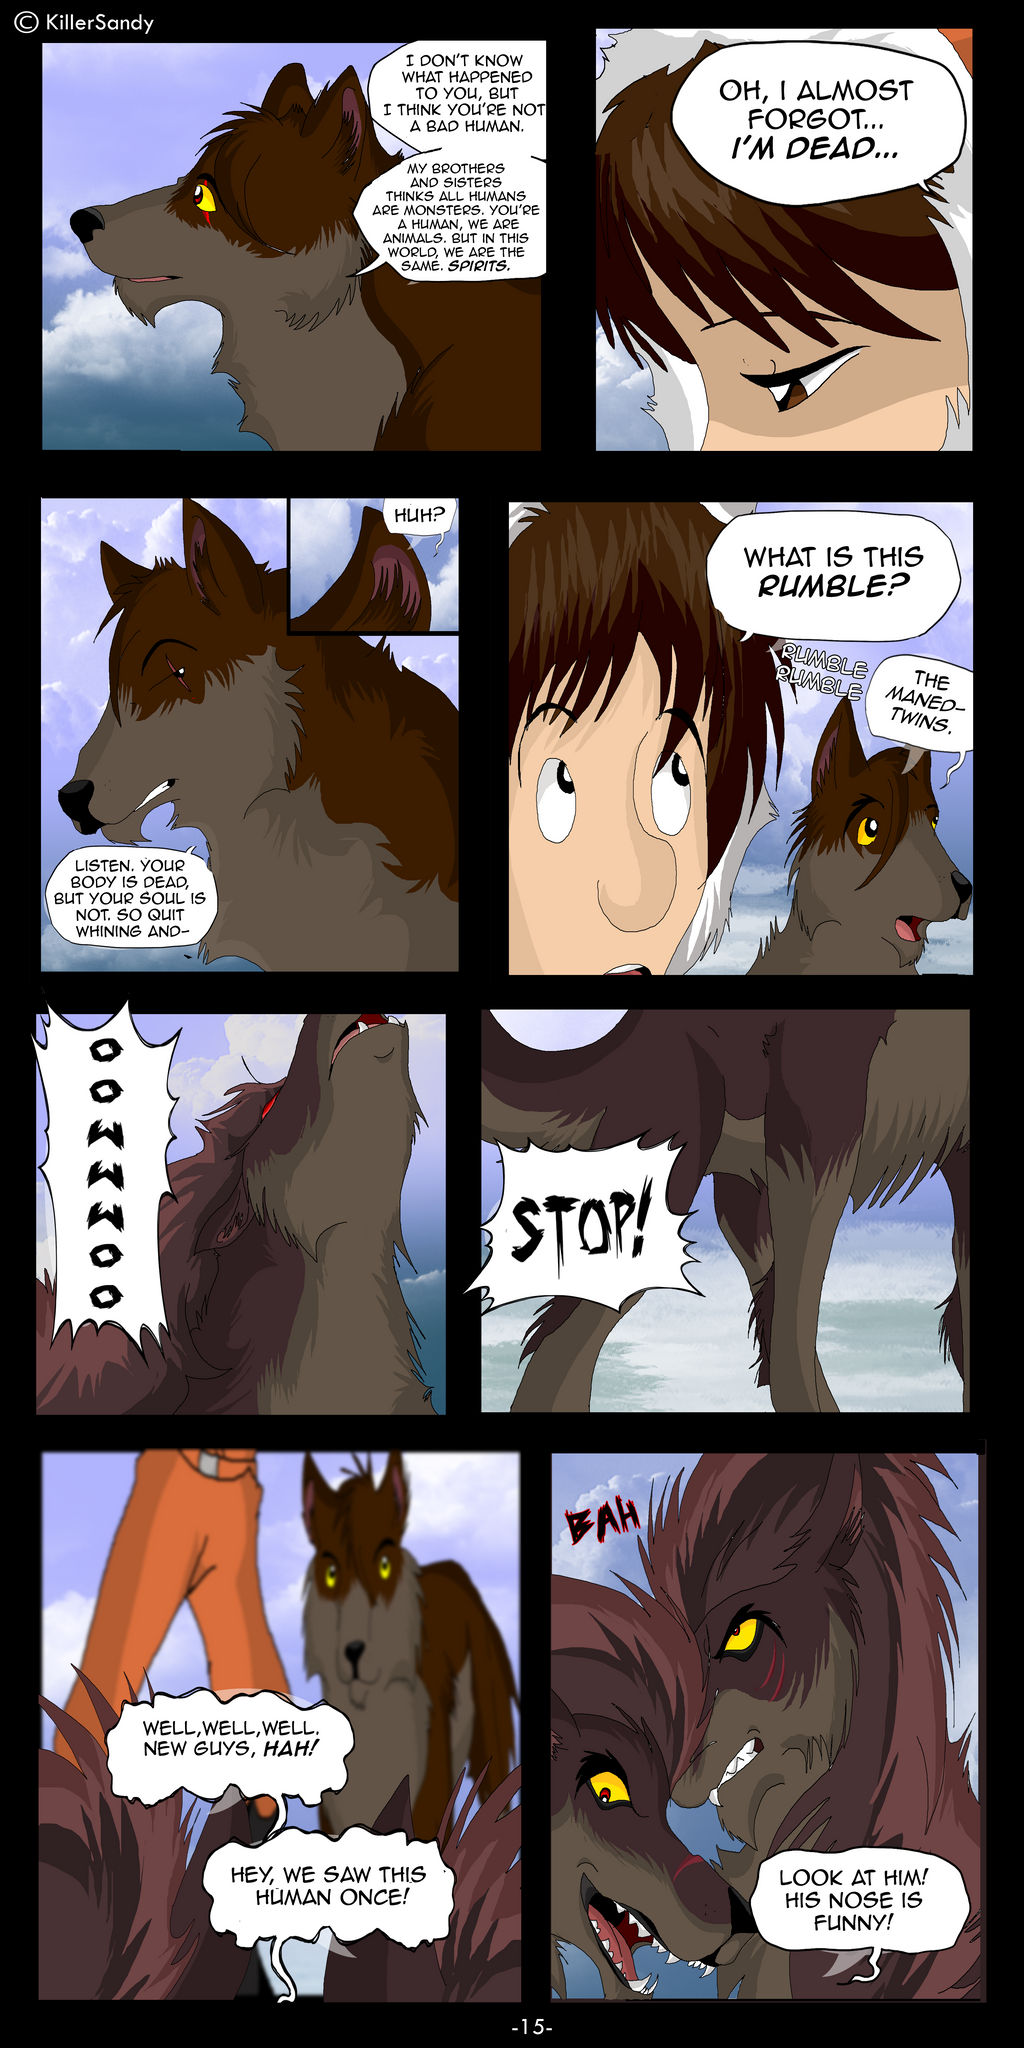 The Prince of the Moonlight Stone page 15